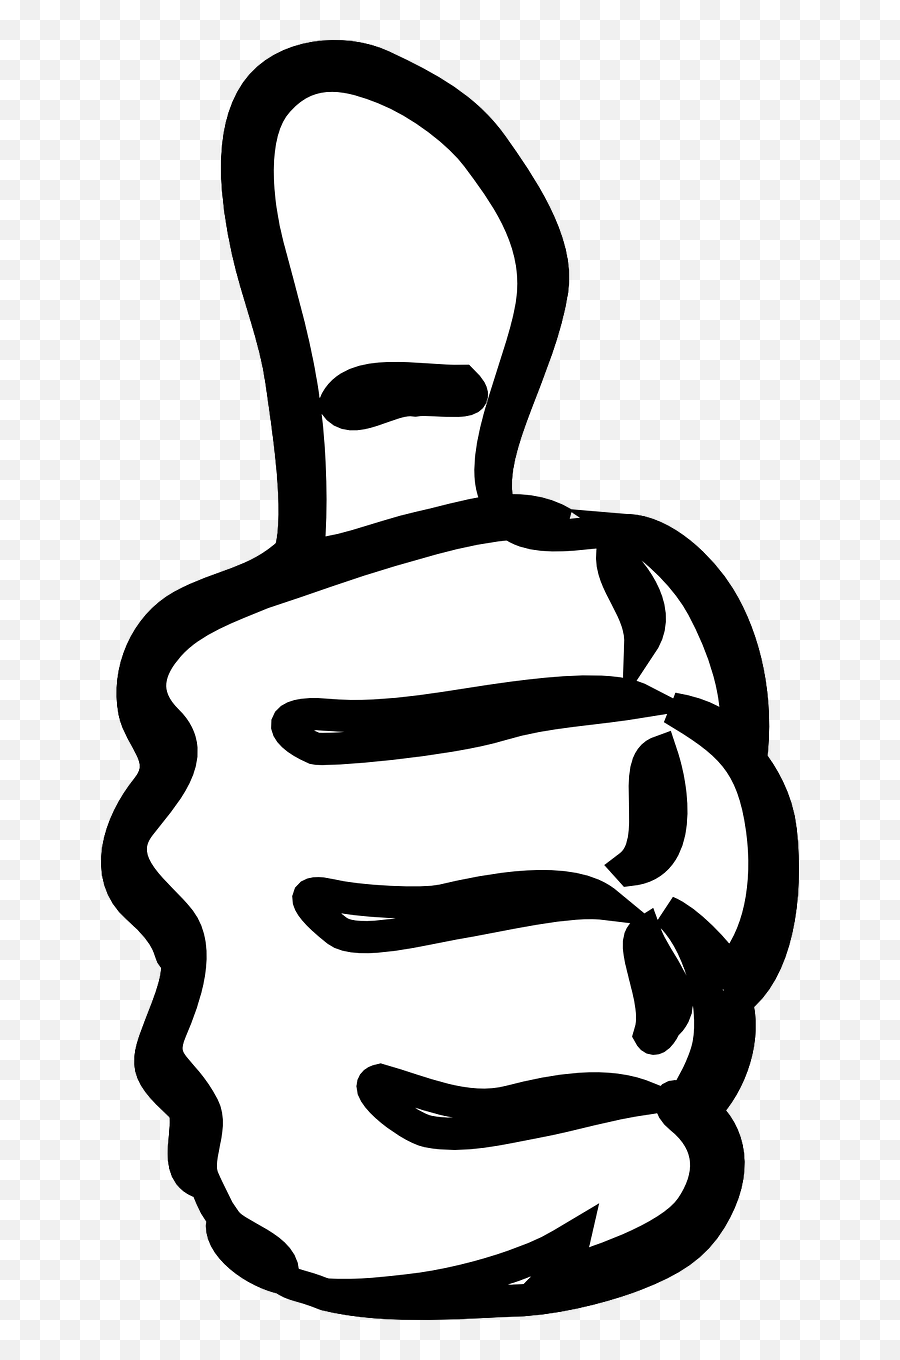 Download White Black Thumbs Up Clip Art - Thumb Up Icon Png Thumbs Up Transparent Background Green,Thumbs Up Icon Transparent Background